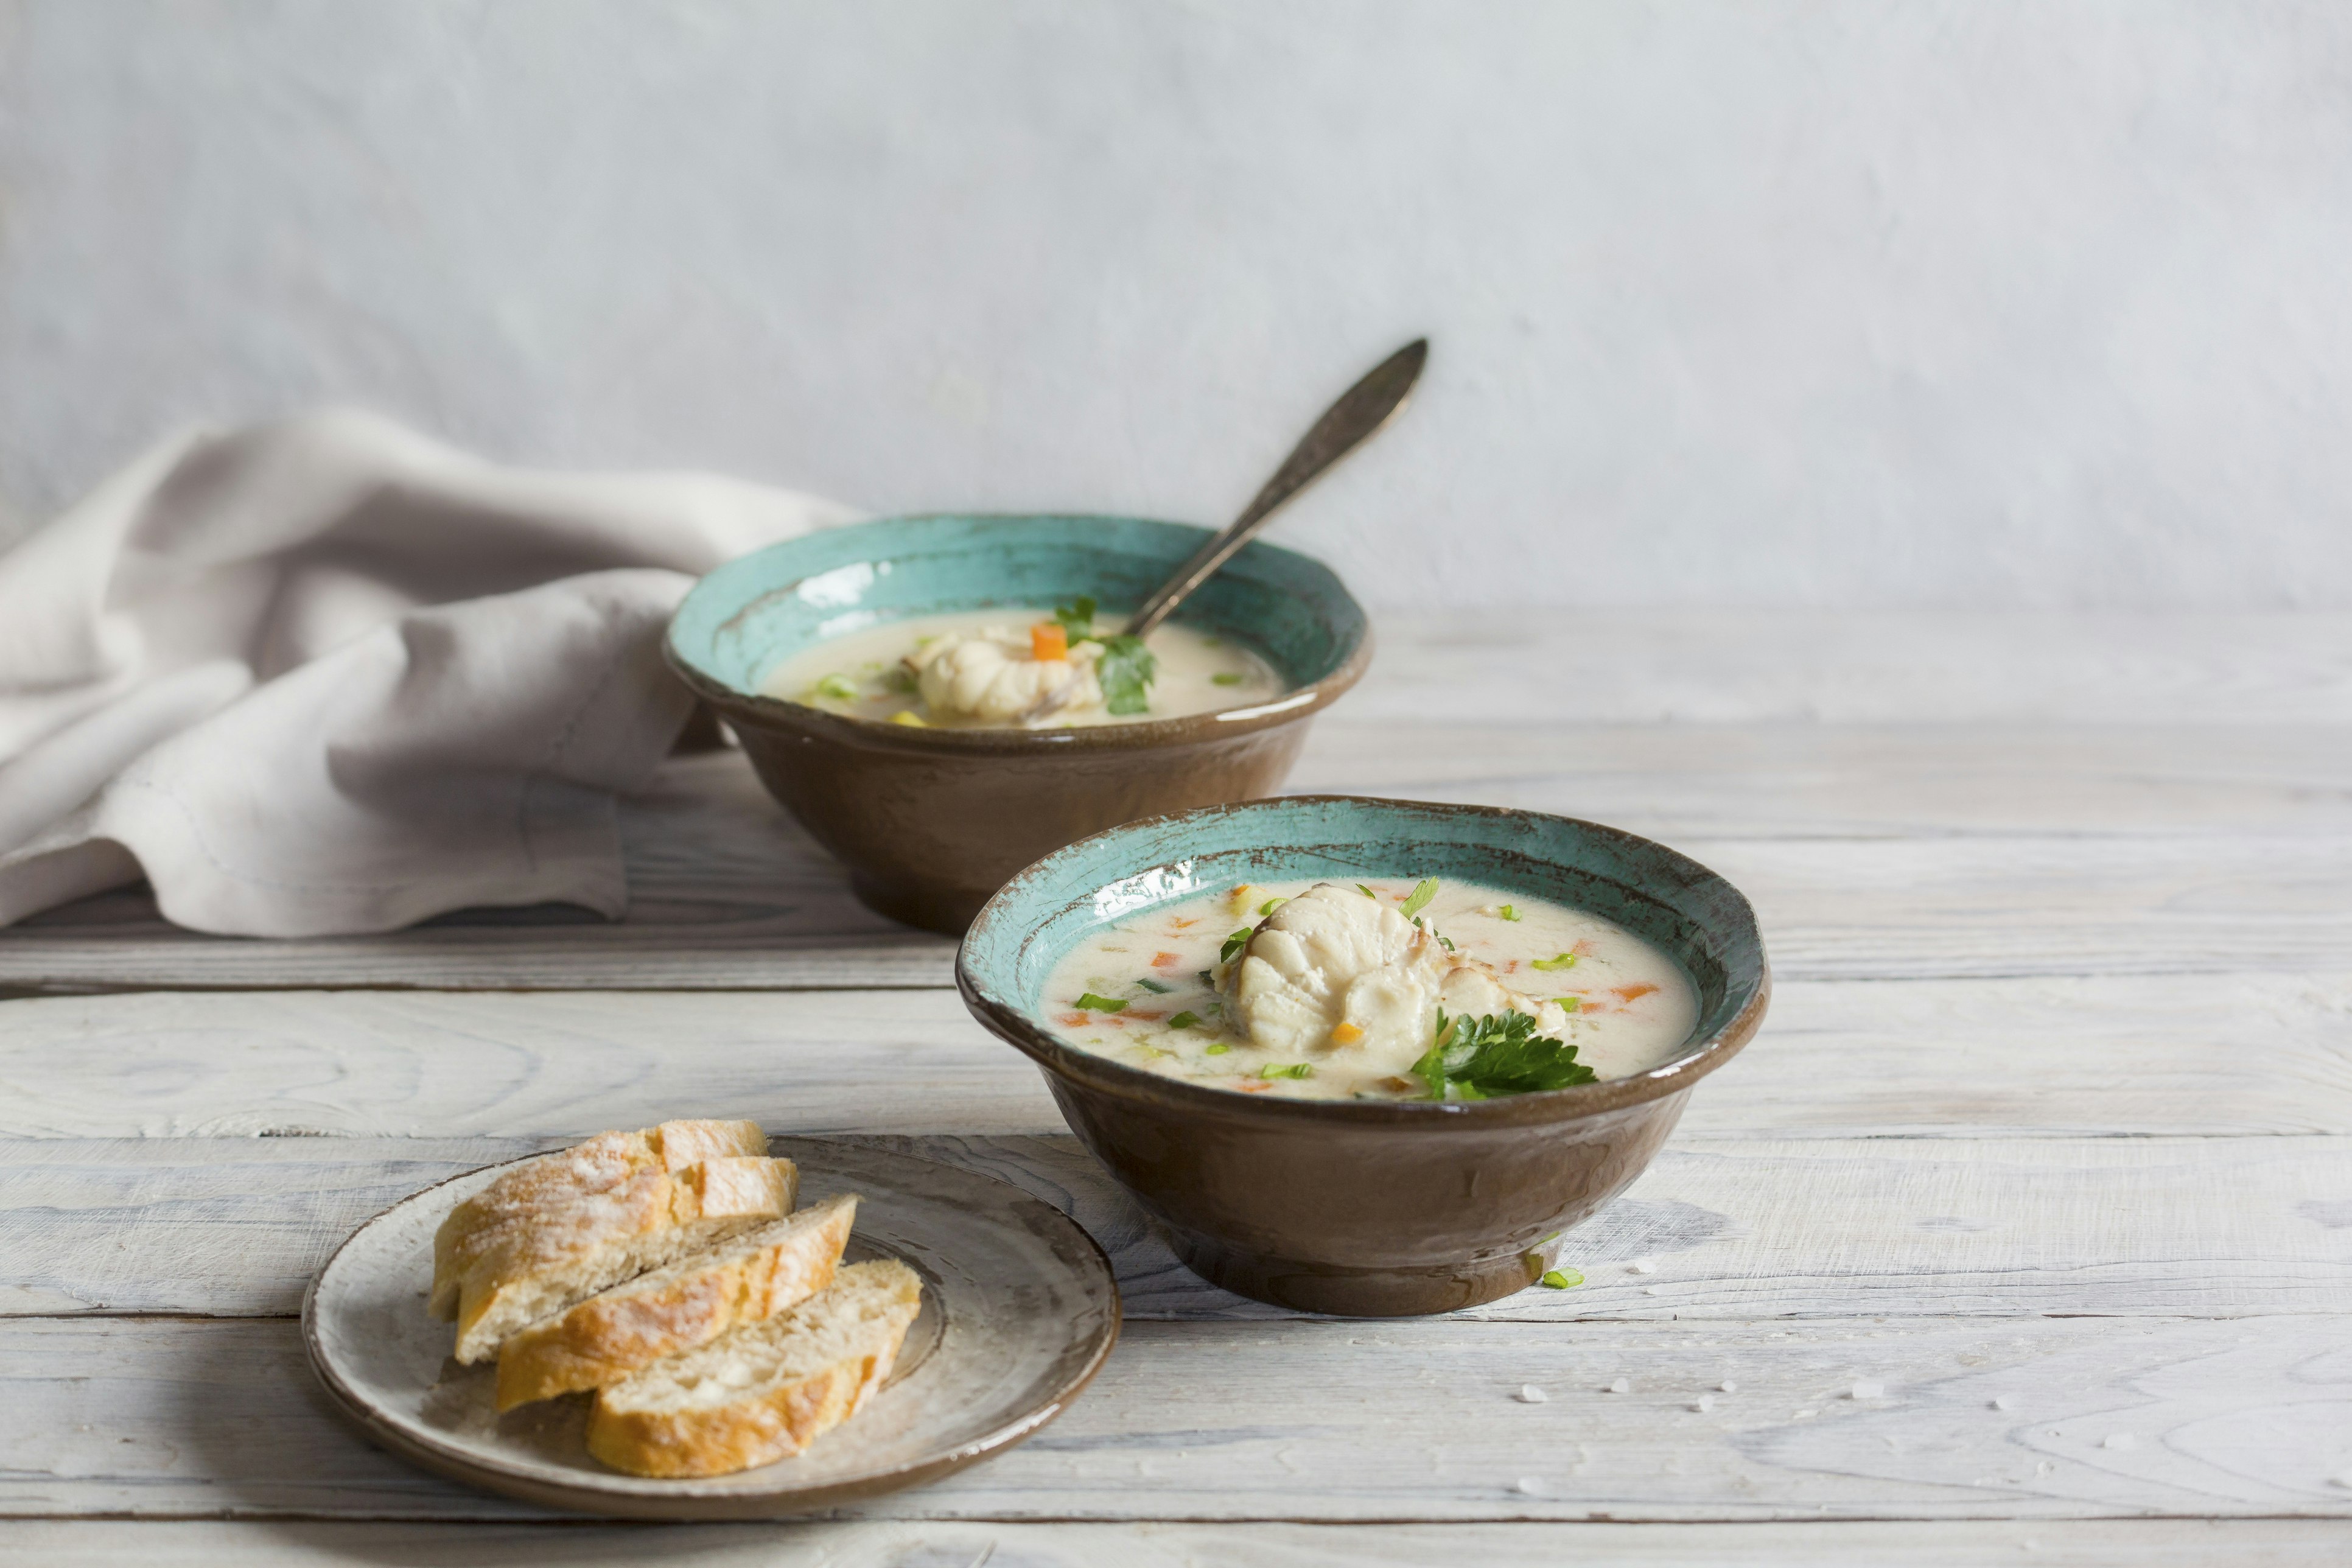 Creamy Norwegian Fish Soup made from haddock, cod and vegetables. 